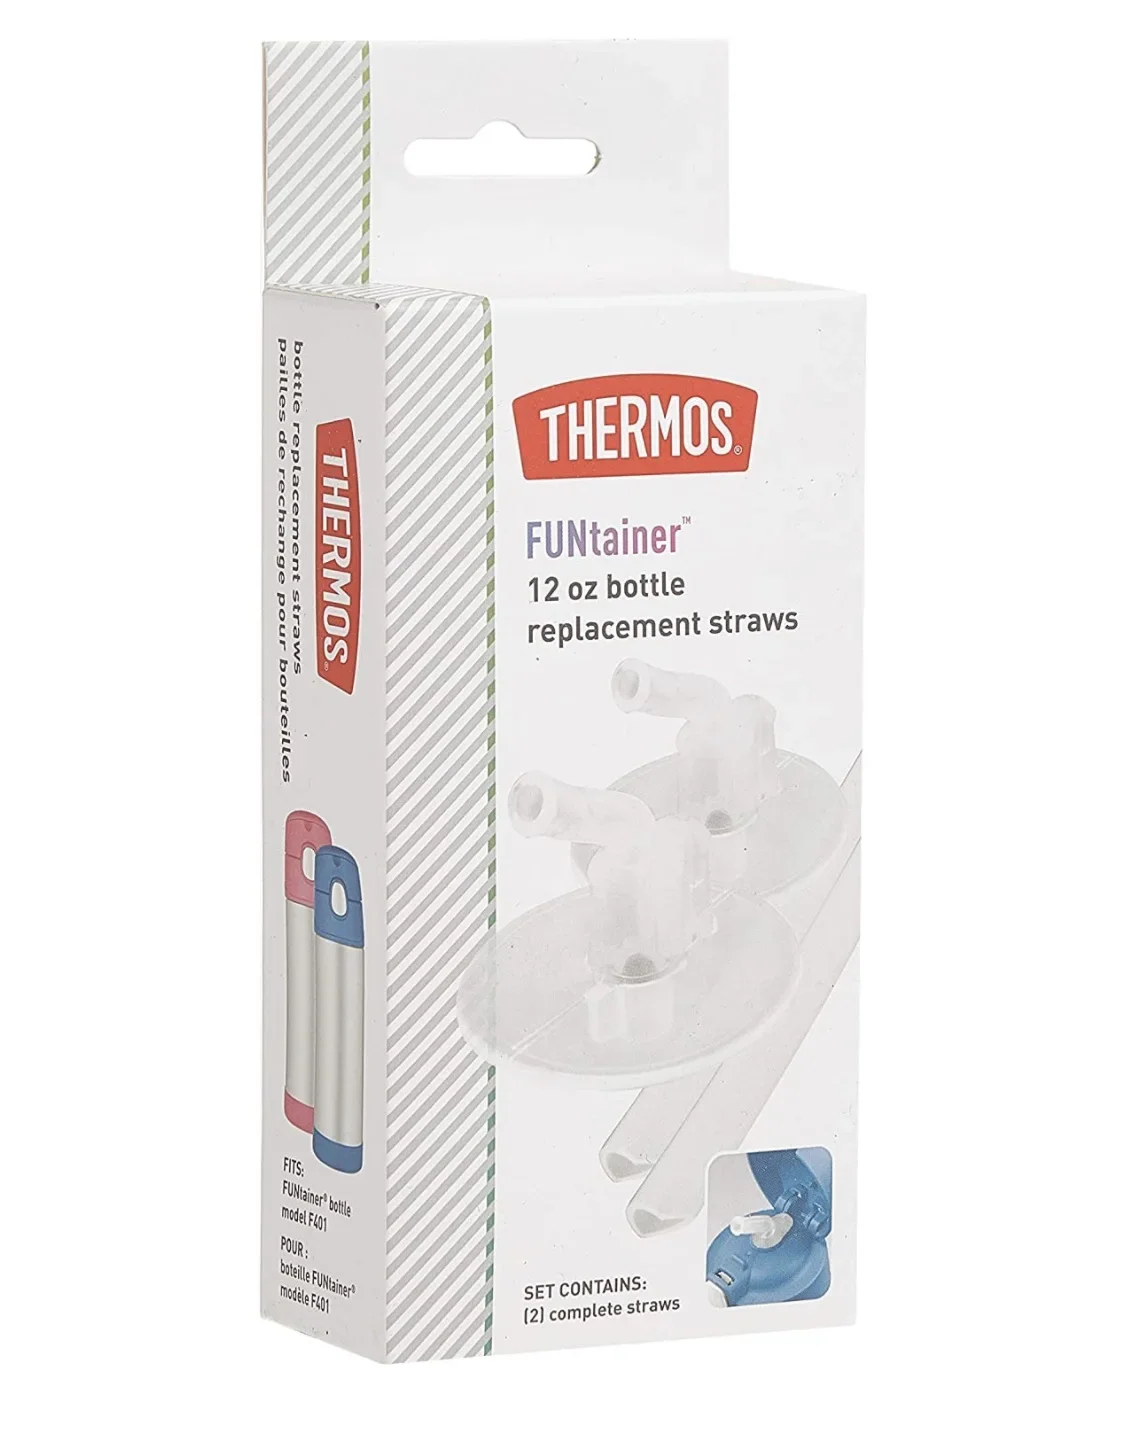 Thermos Replacement Straws for 12-Ounce Funtainer Bottle 12 oz. Clear